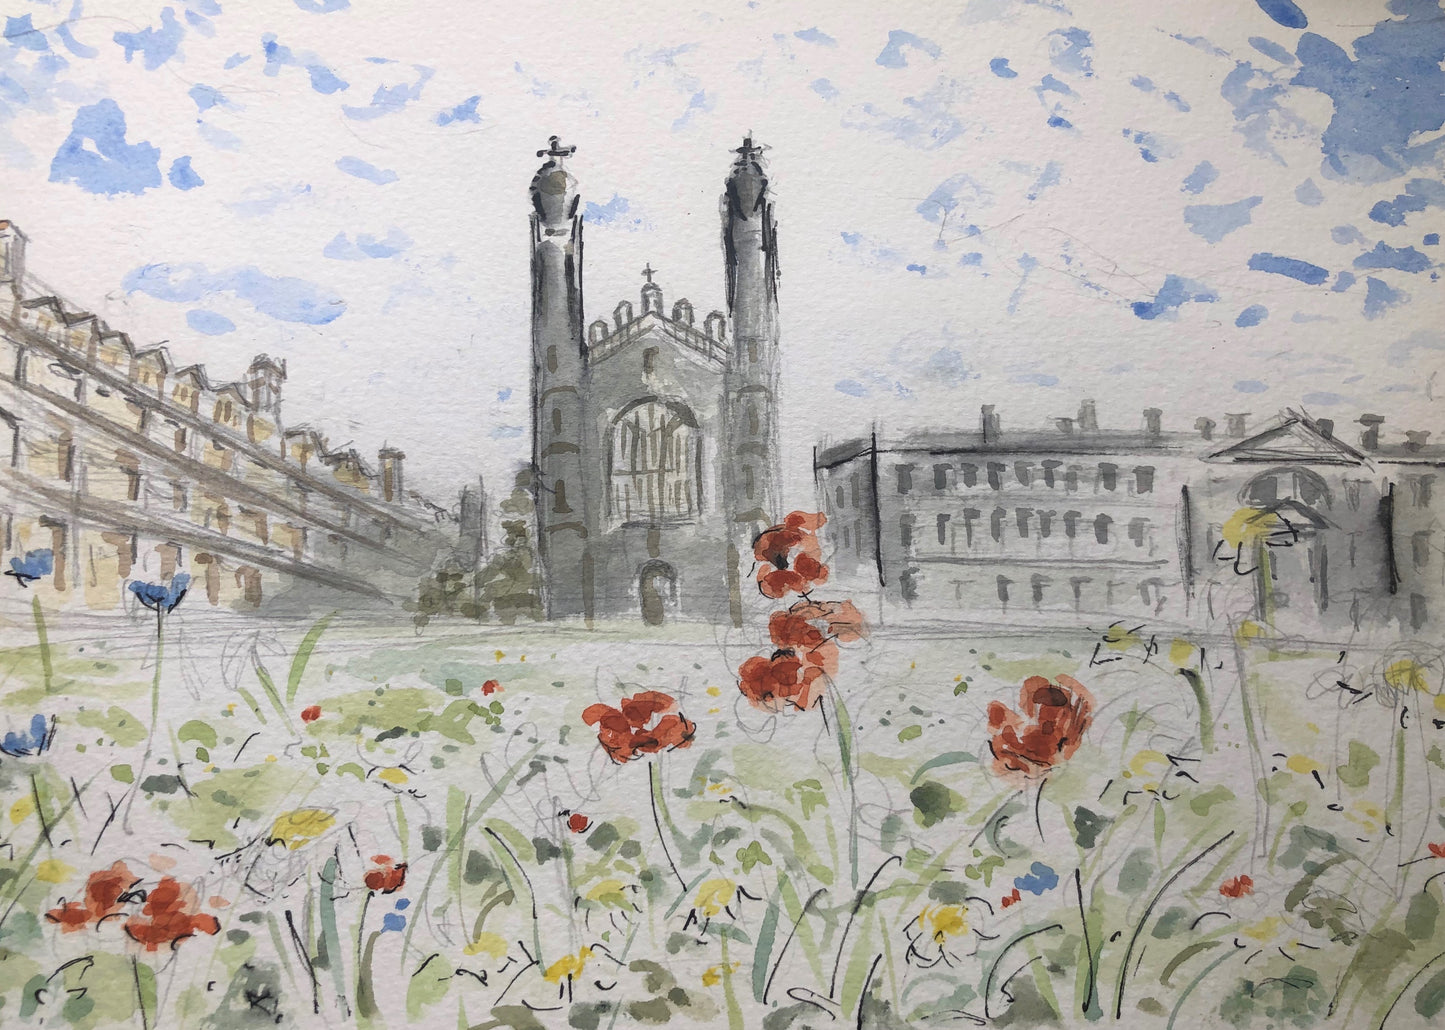 Kings College, The Back's summer meadow view